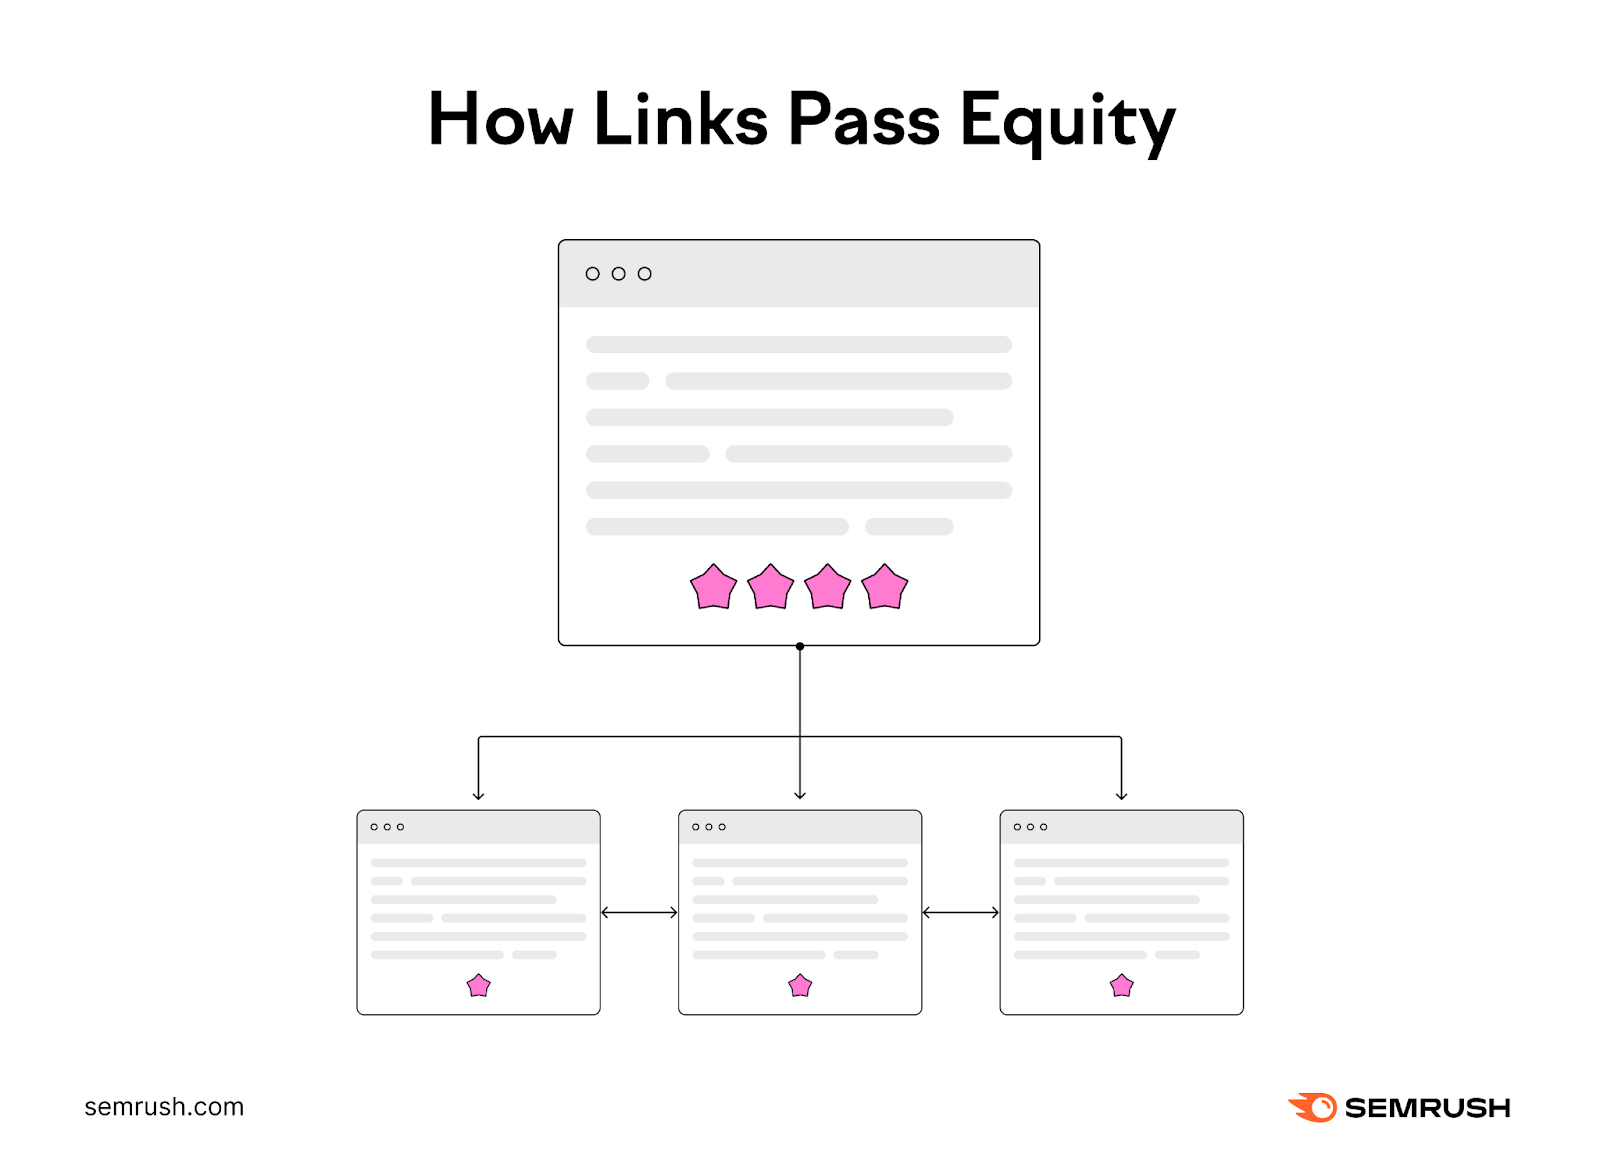 How links pass equity